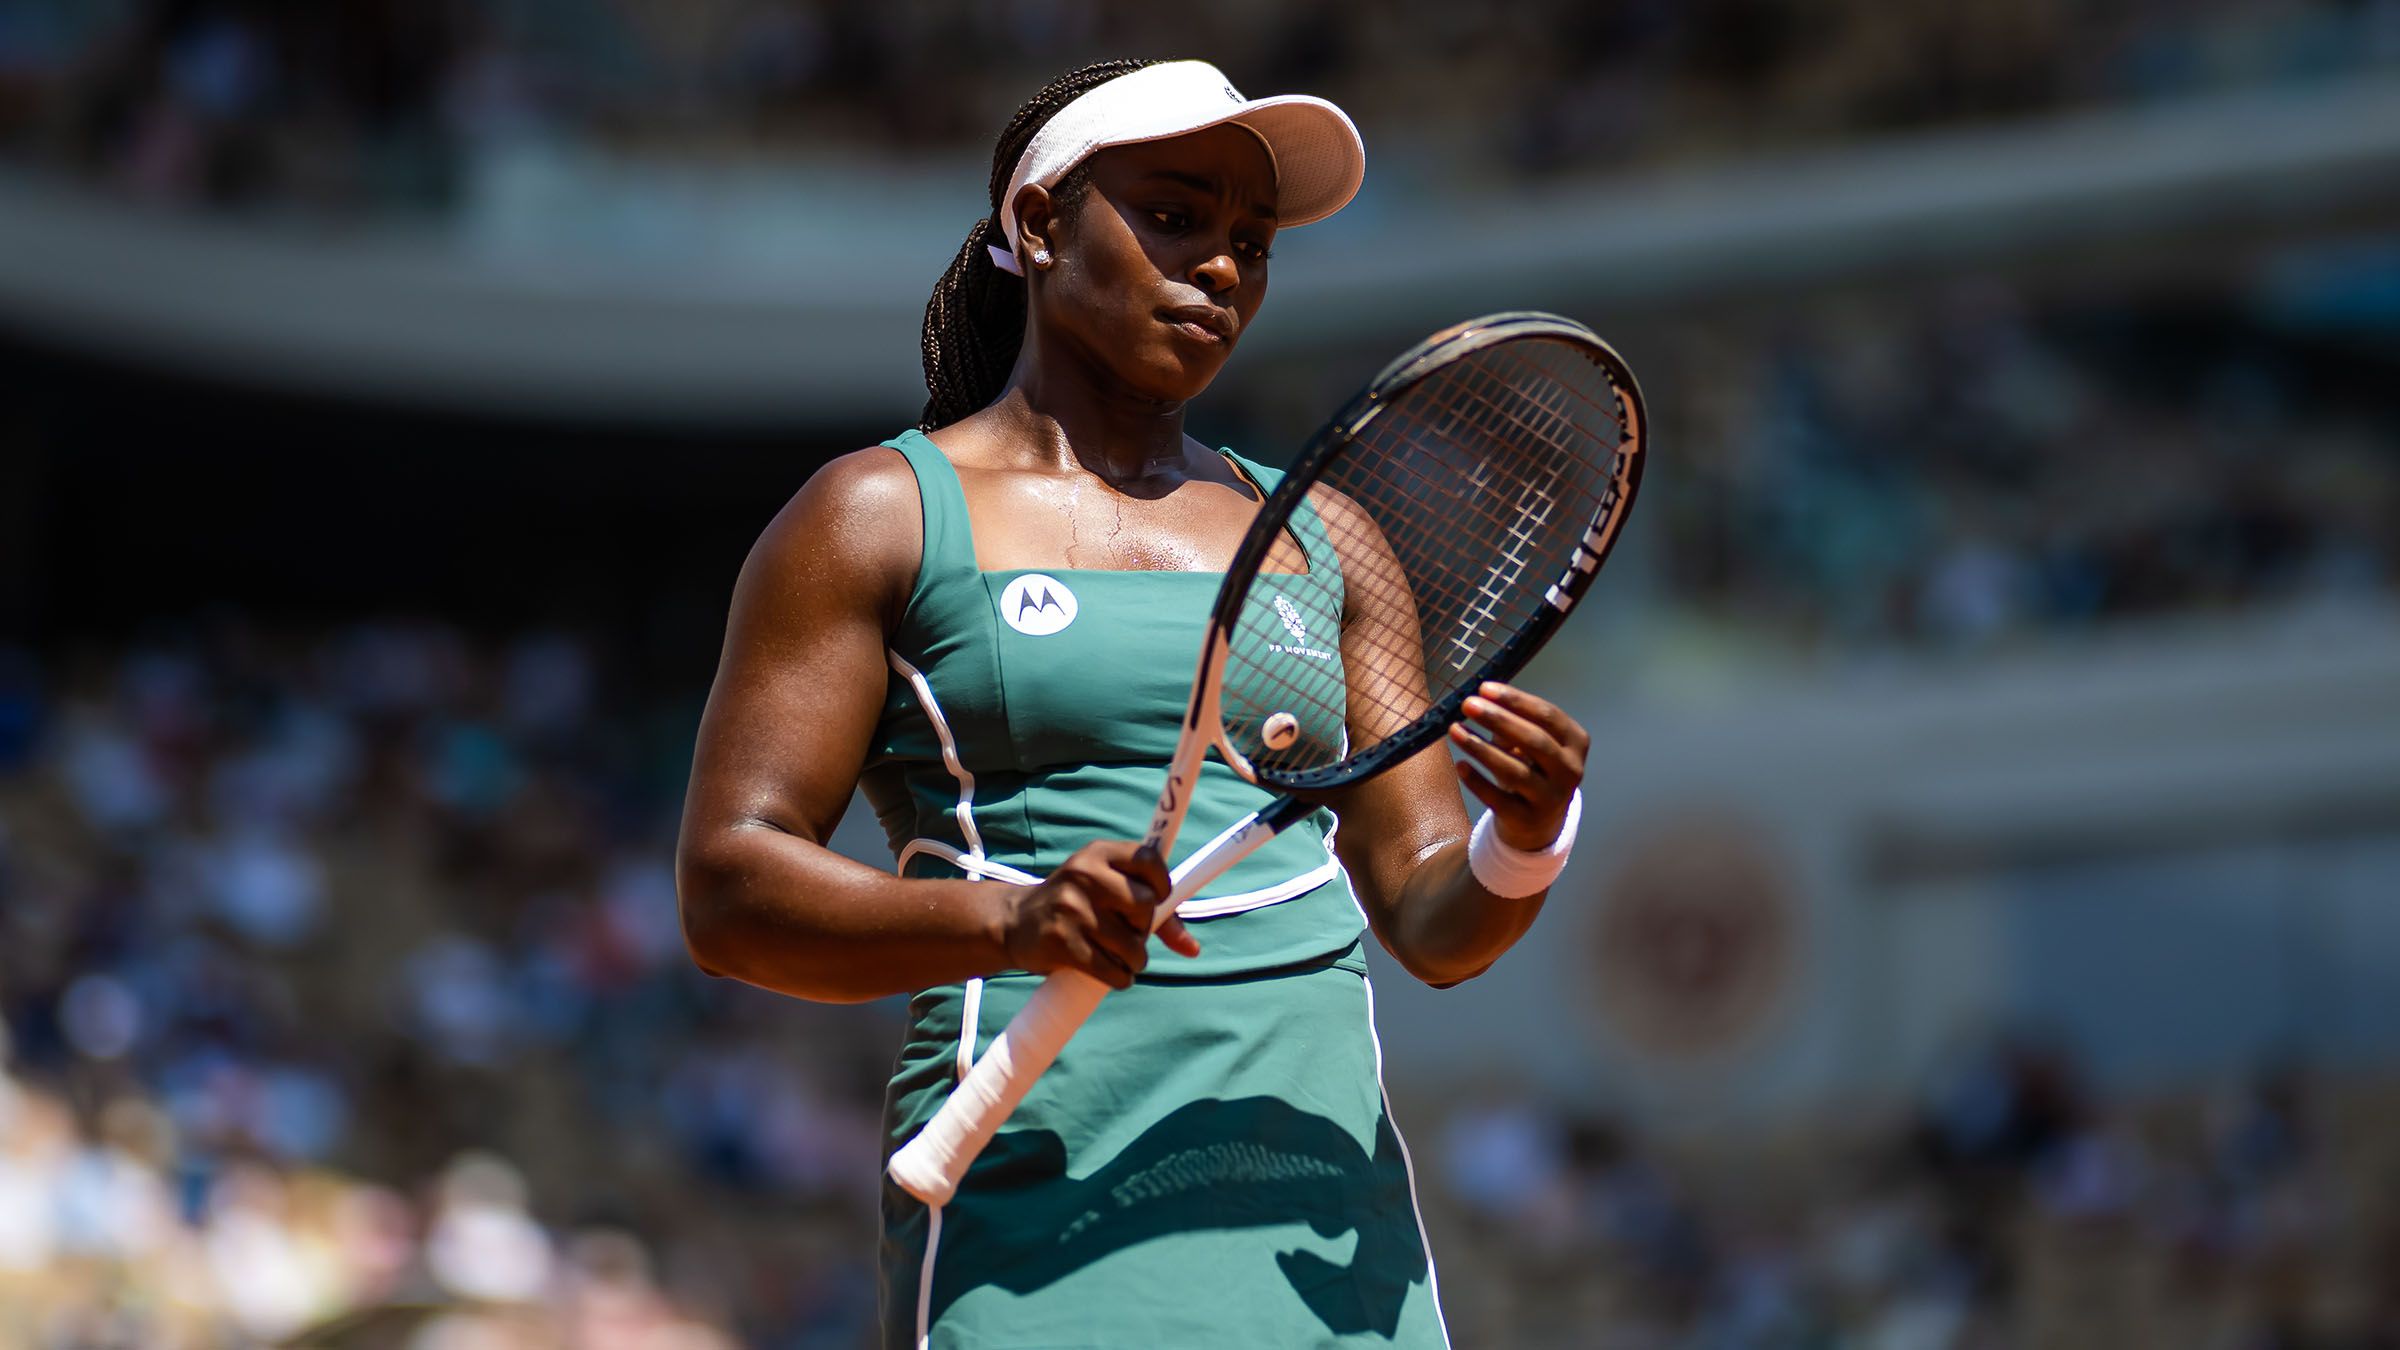 Tennis Star Sloane Stephens Says Online Racist Abuse Has Only Worsened News BET